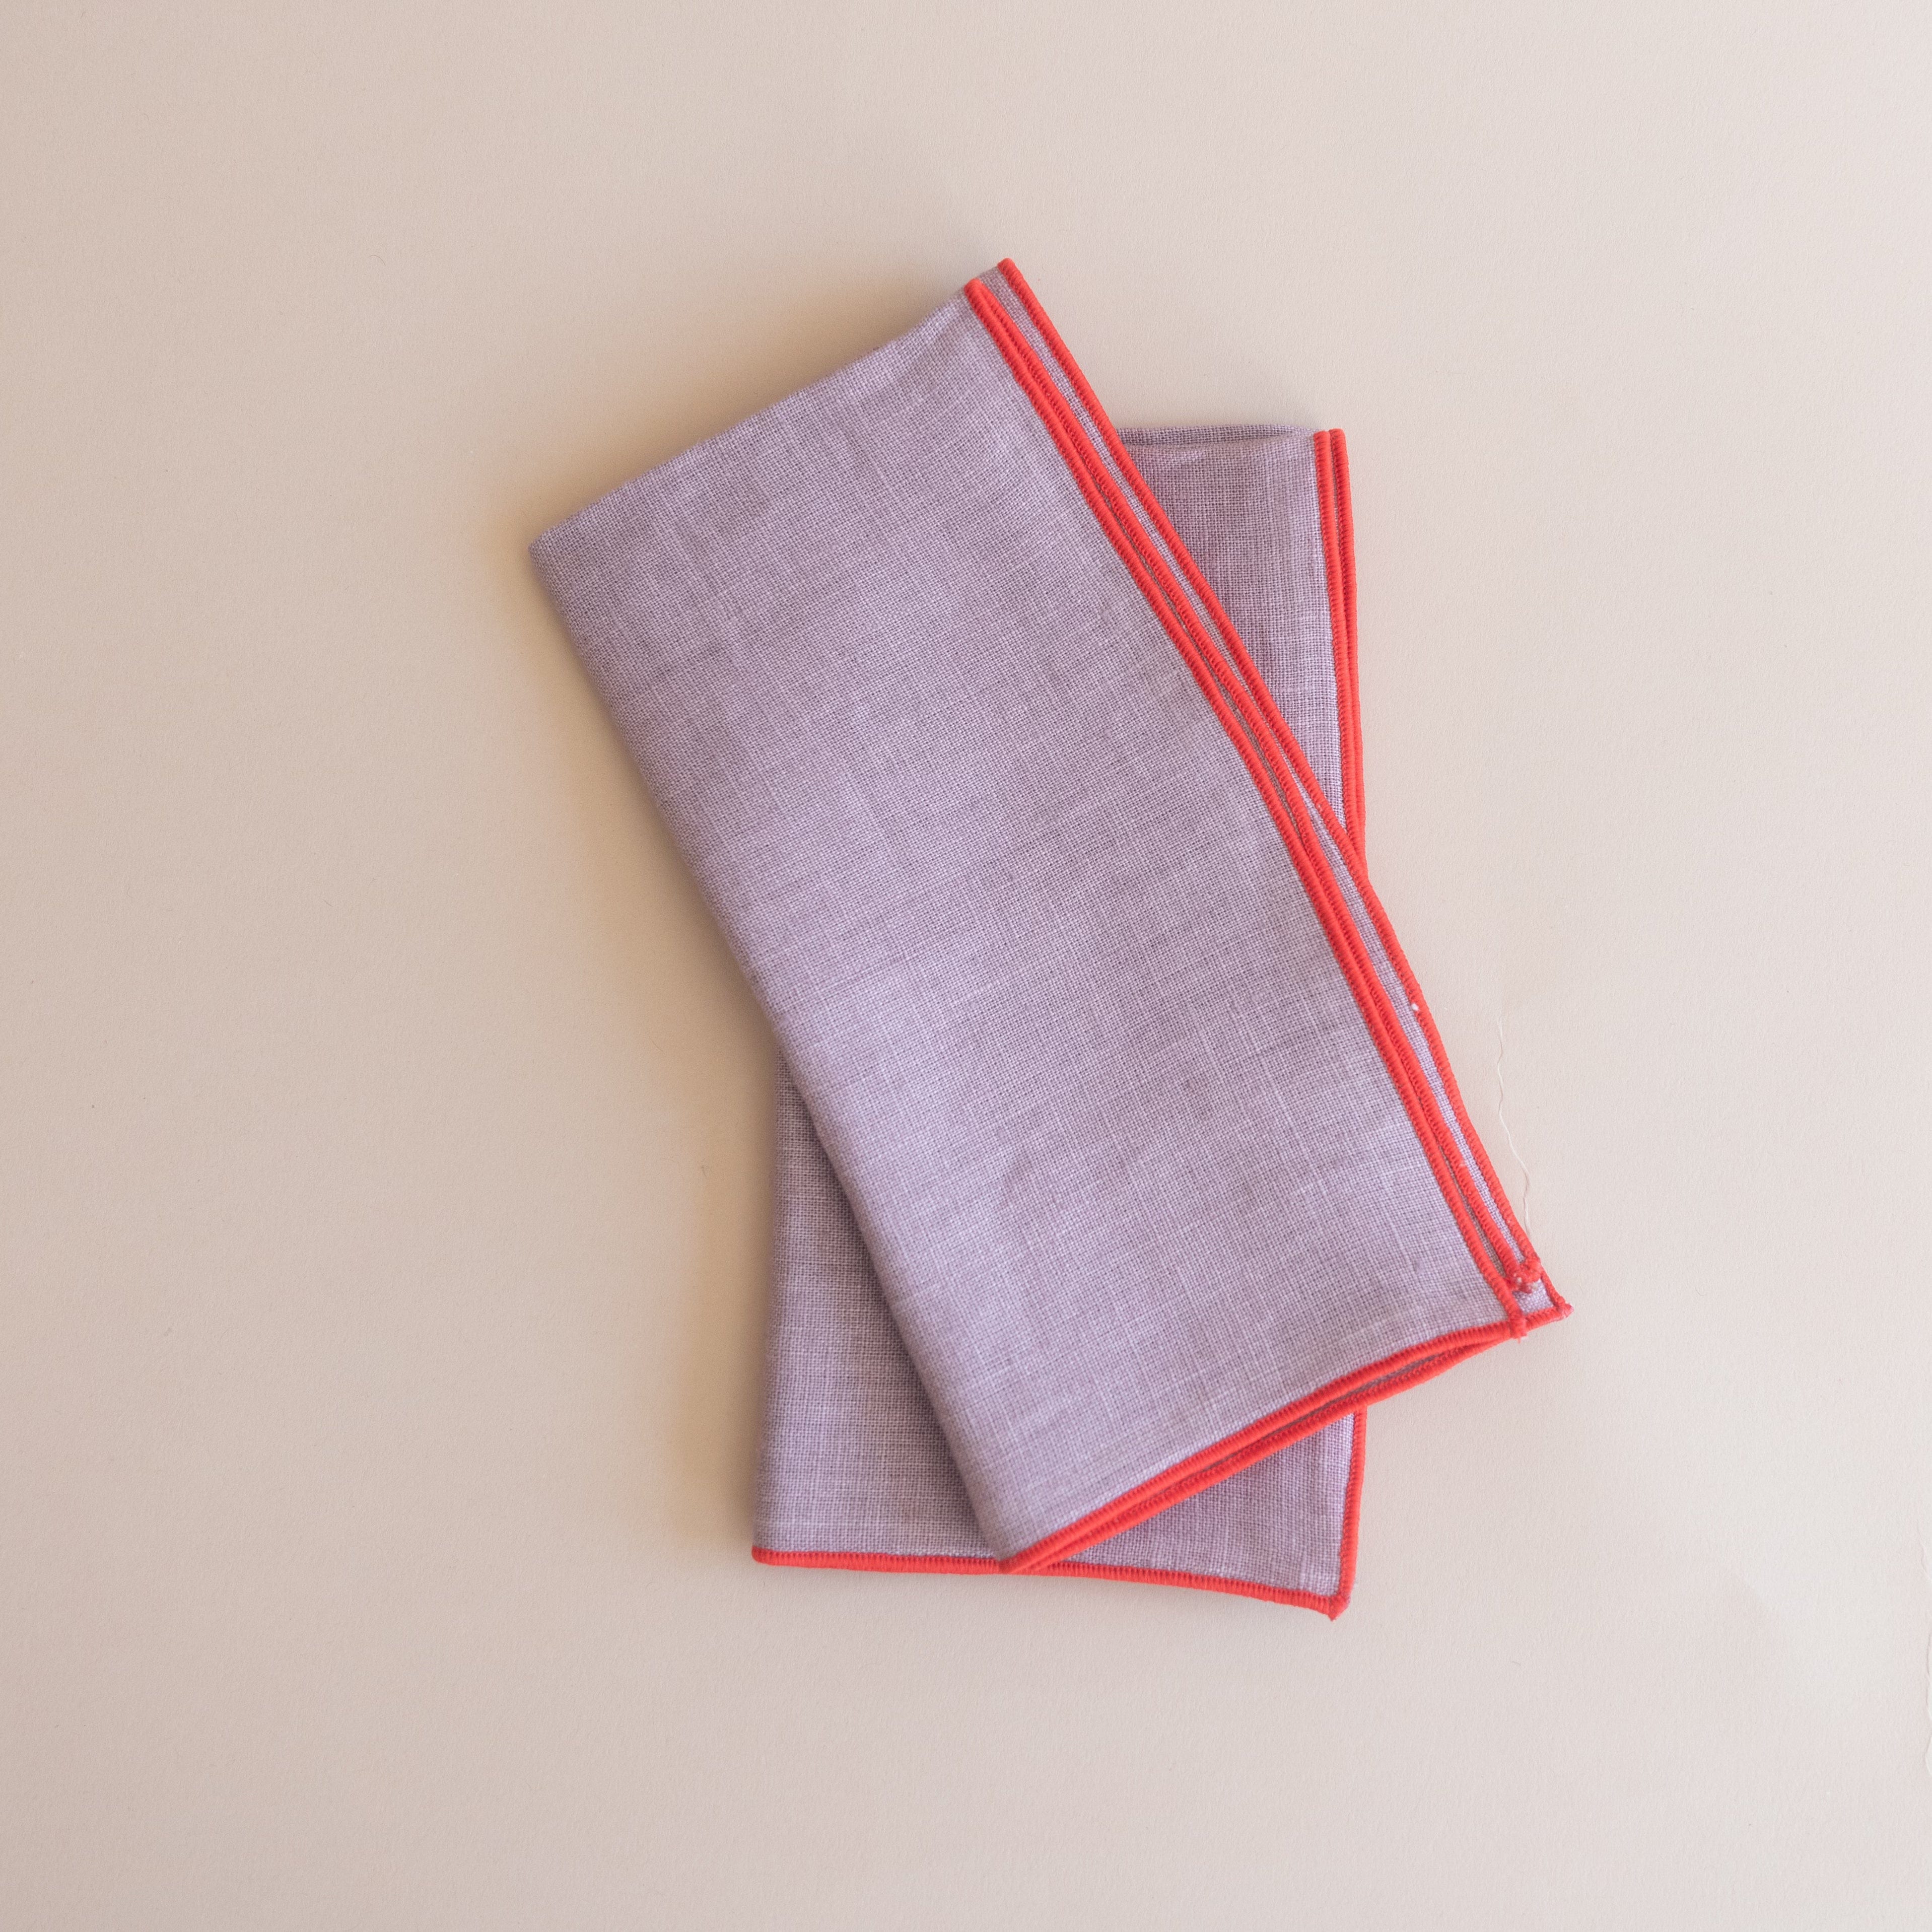 Madre Linens Oyster / Medium Napkins by Madre